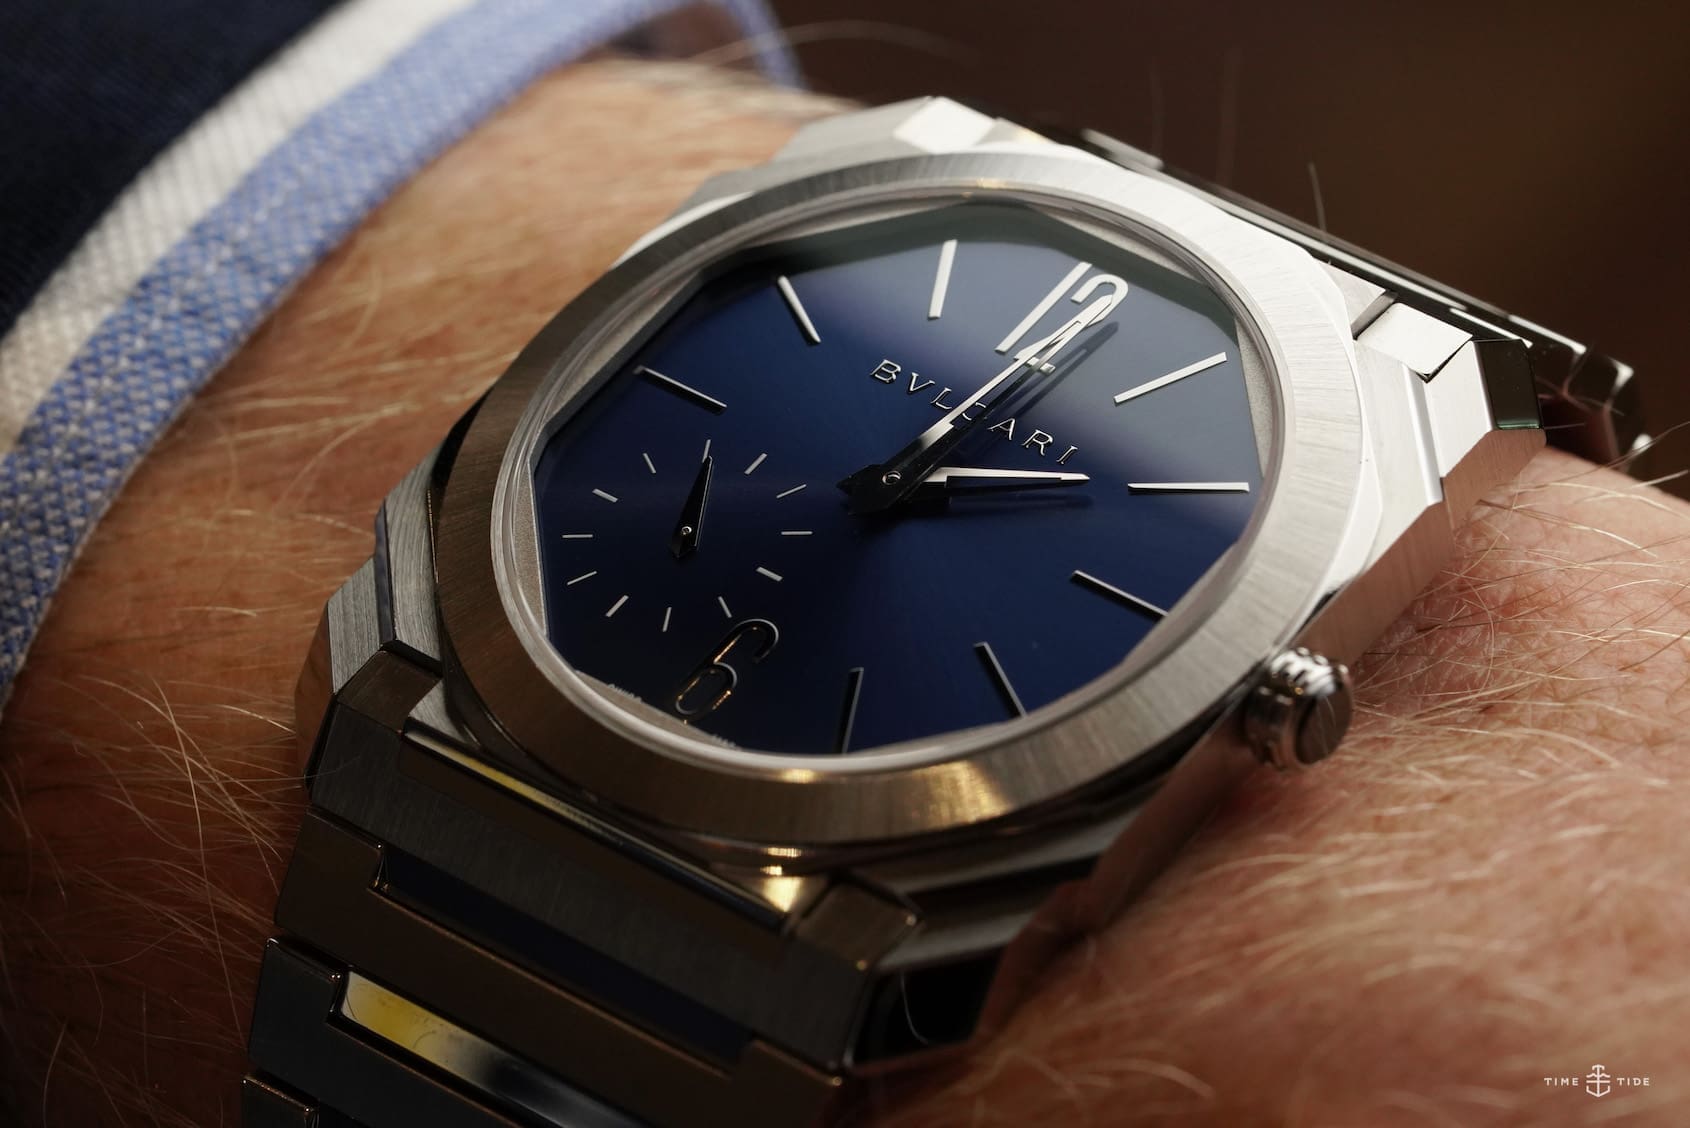 EDITOR’S PICK: Exploring five of the best watches with “robust elegance”